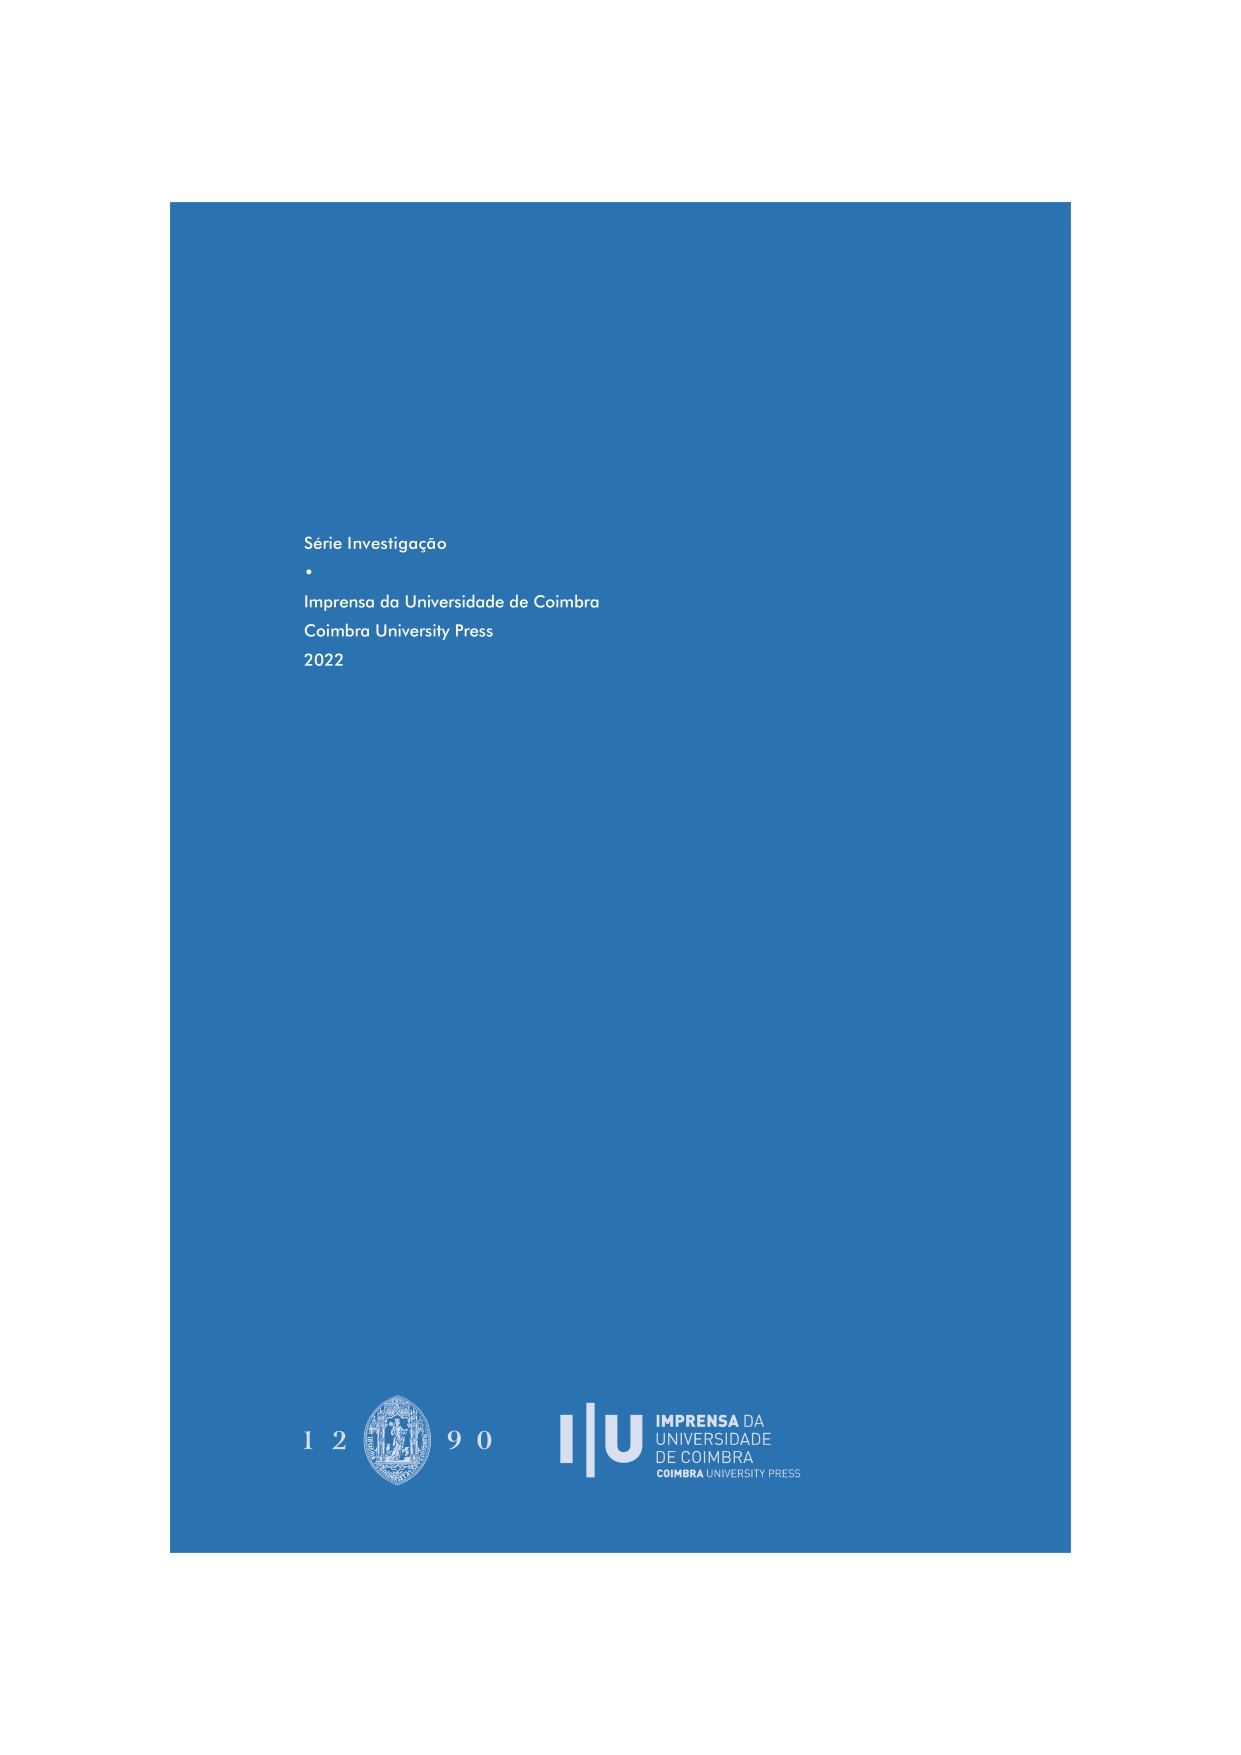 Book “European Union as an International Actor: Peace and Security in Narratives and Practices”